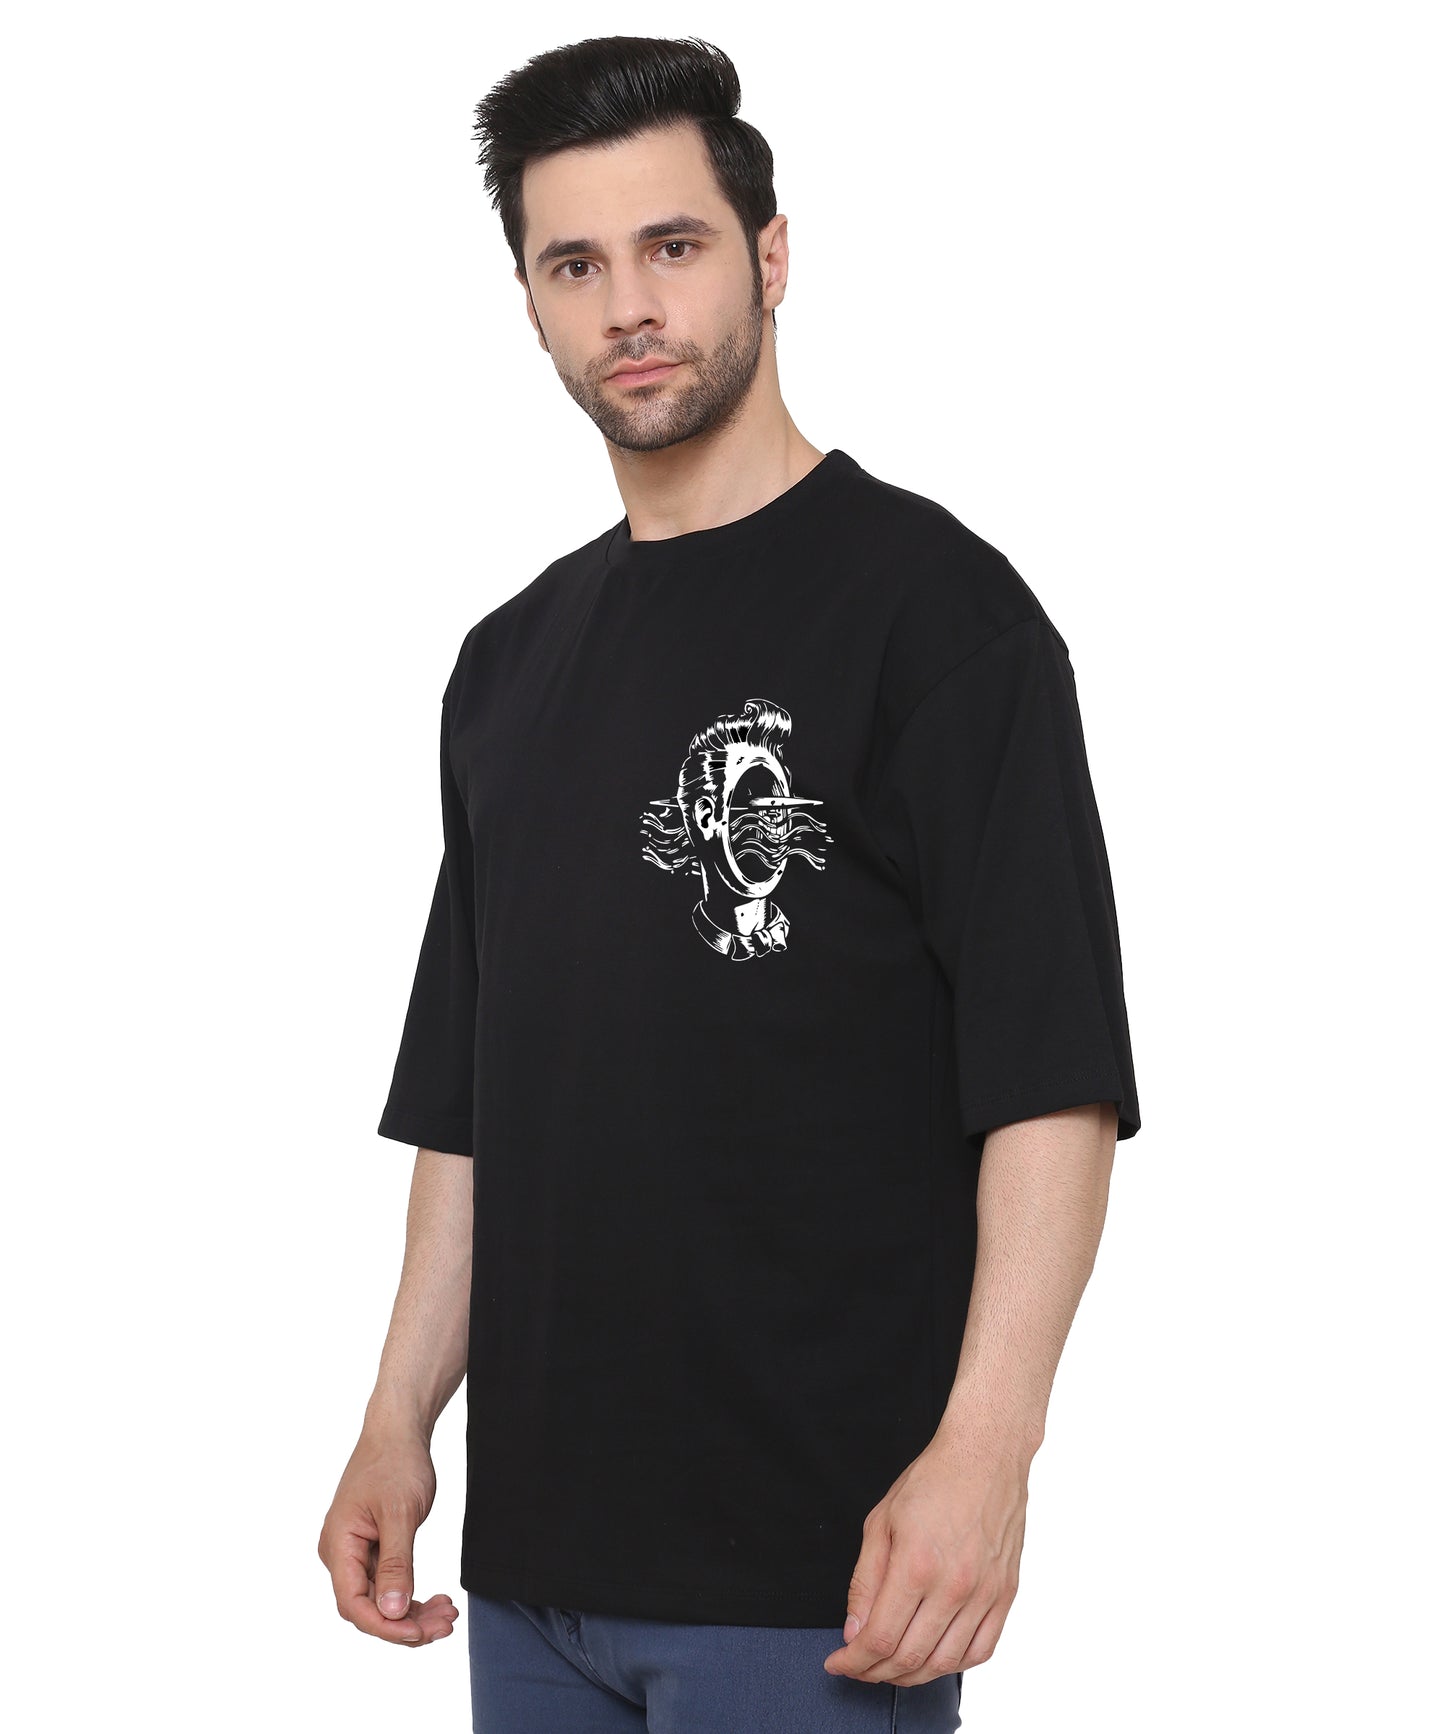 Oversized Cotton T-shirts Relaxed Fit Tees for Men